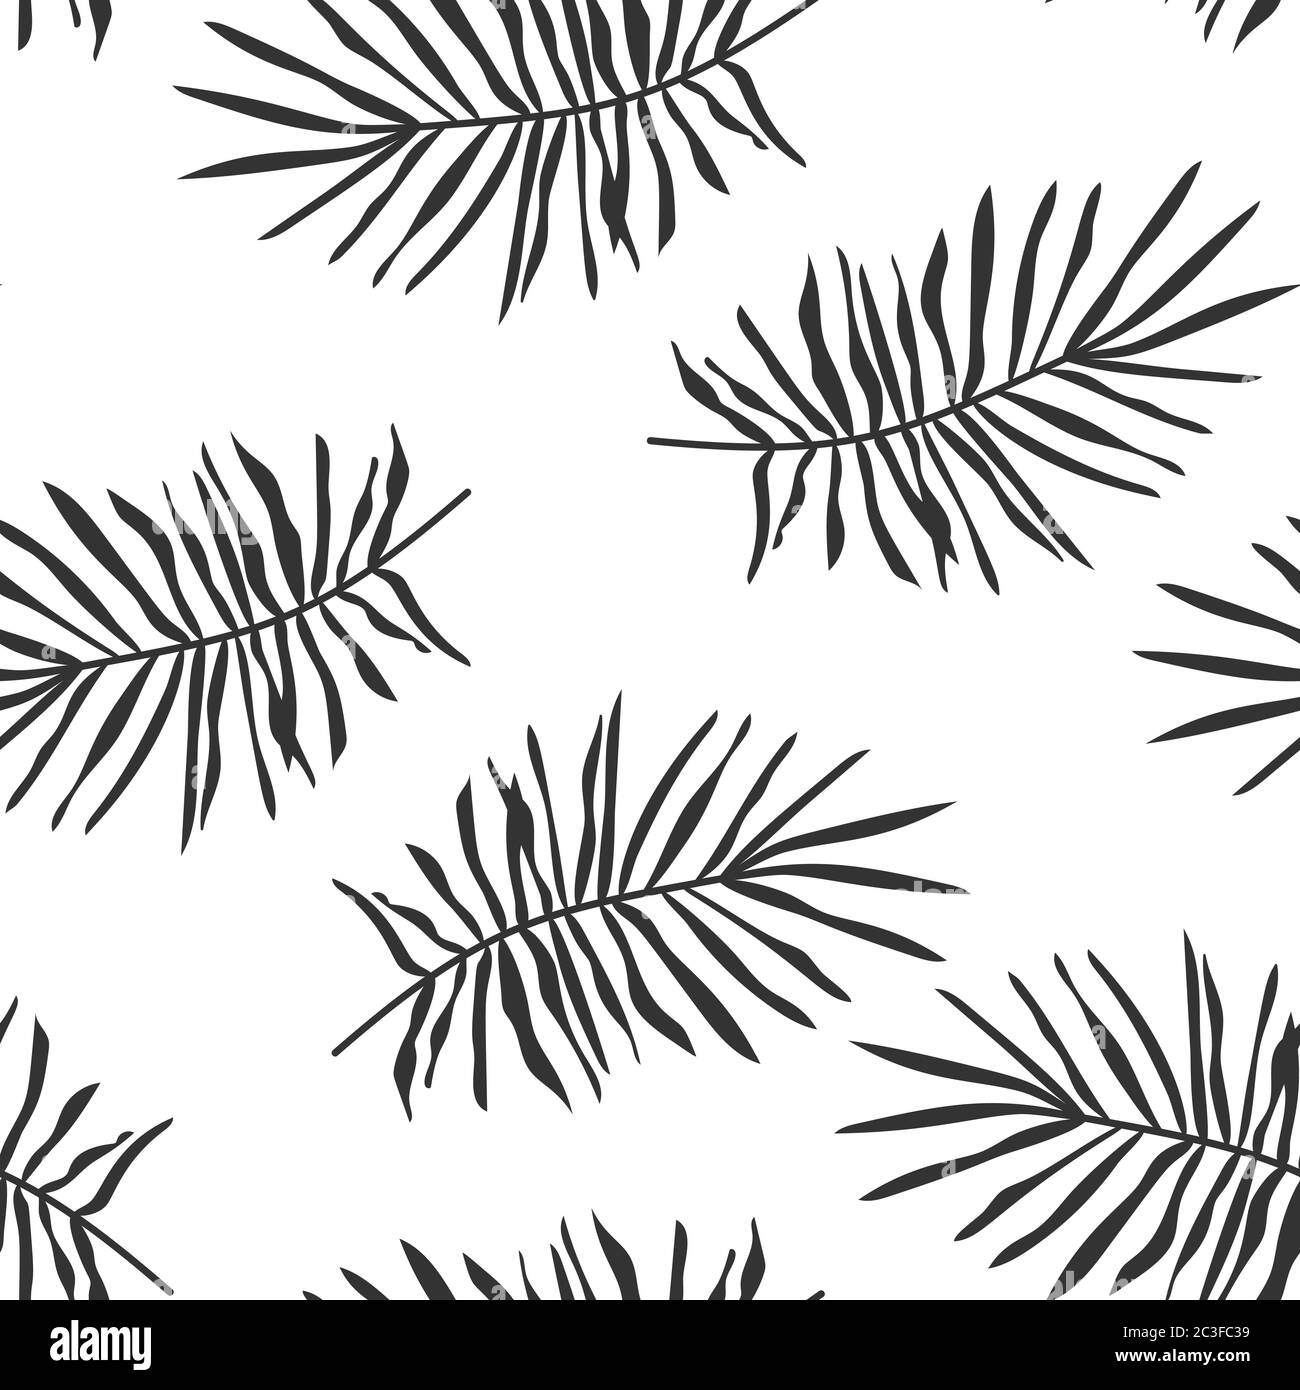 Black tropical palm leaves or pine branch seamless pattern. Limitless background with exotic floral flat cartoon element, botany sign. Repeat ornament for paper wrap, fabric, print Vector illustration Stock Vector